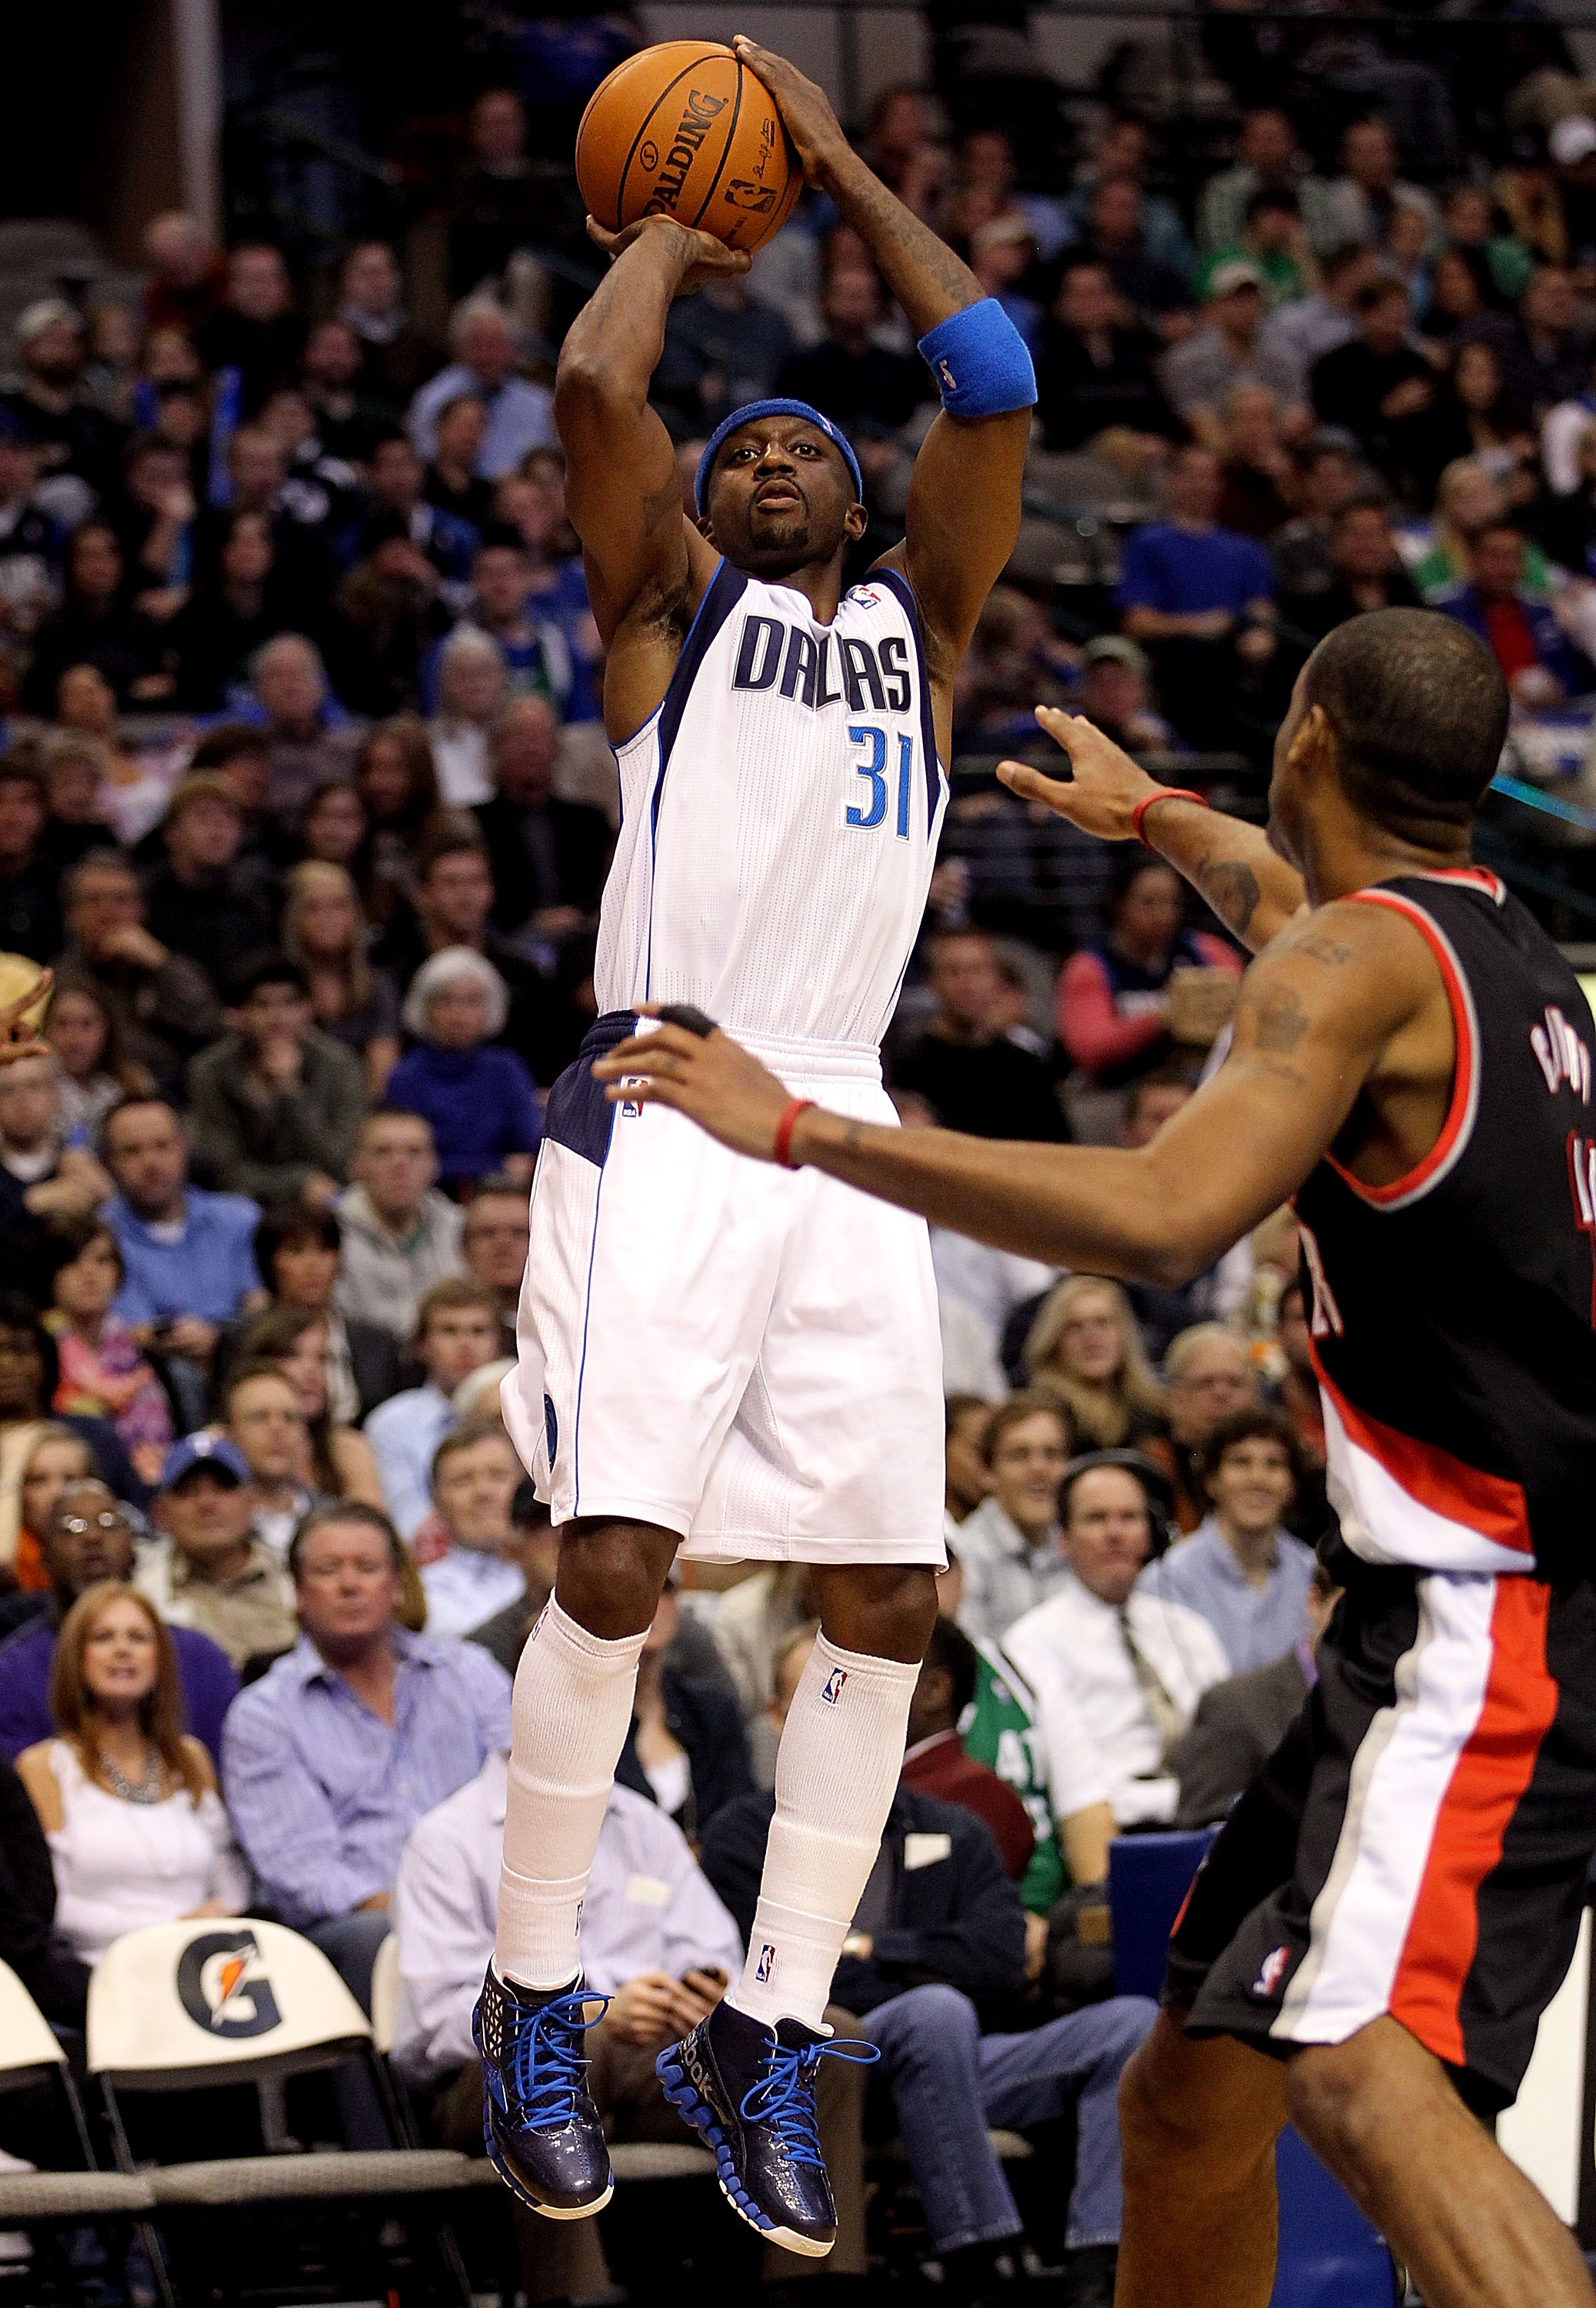 DALLAS, TX - JANUARY 04:  Guard Jason Terry #31 of the Dallas Mavericks takes a shot against Marcus Camby #23 of the Portland Trail Blazers at American Airlines Center on January 4, 2011 in Dallas, Texas.  NOTE TO USER: User expressly acknowledges and agr